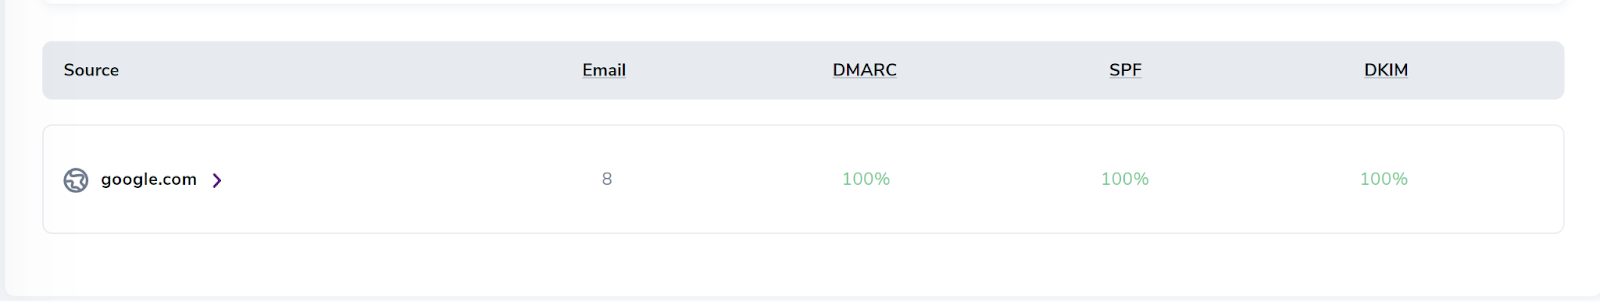 DMARC monitor Sources